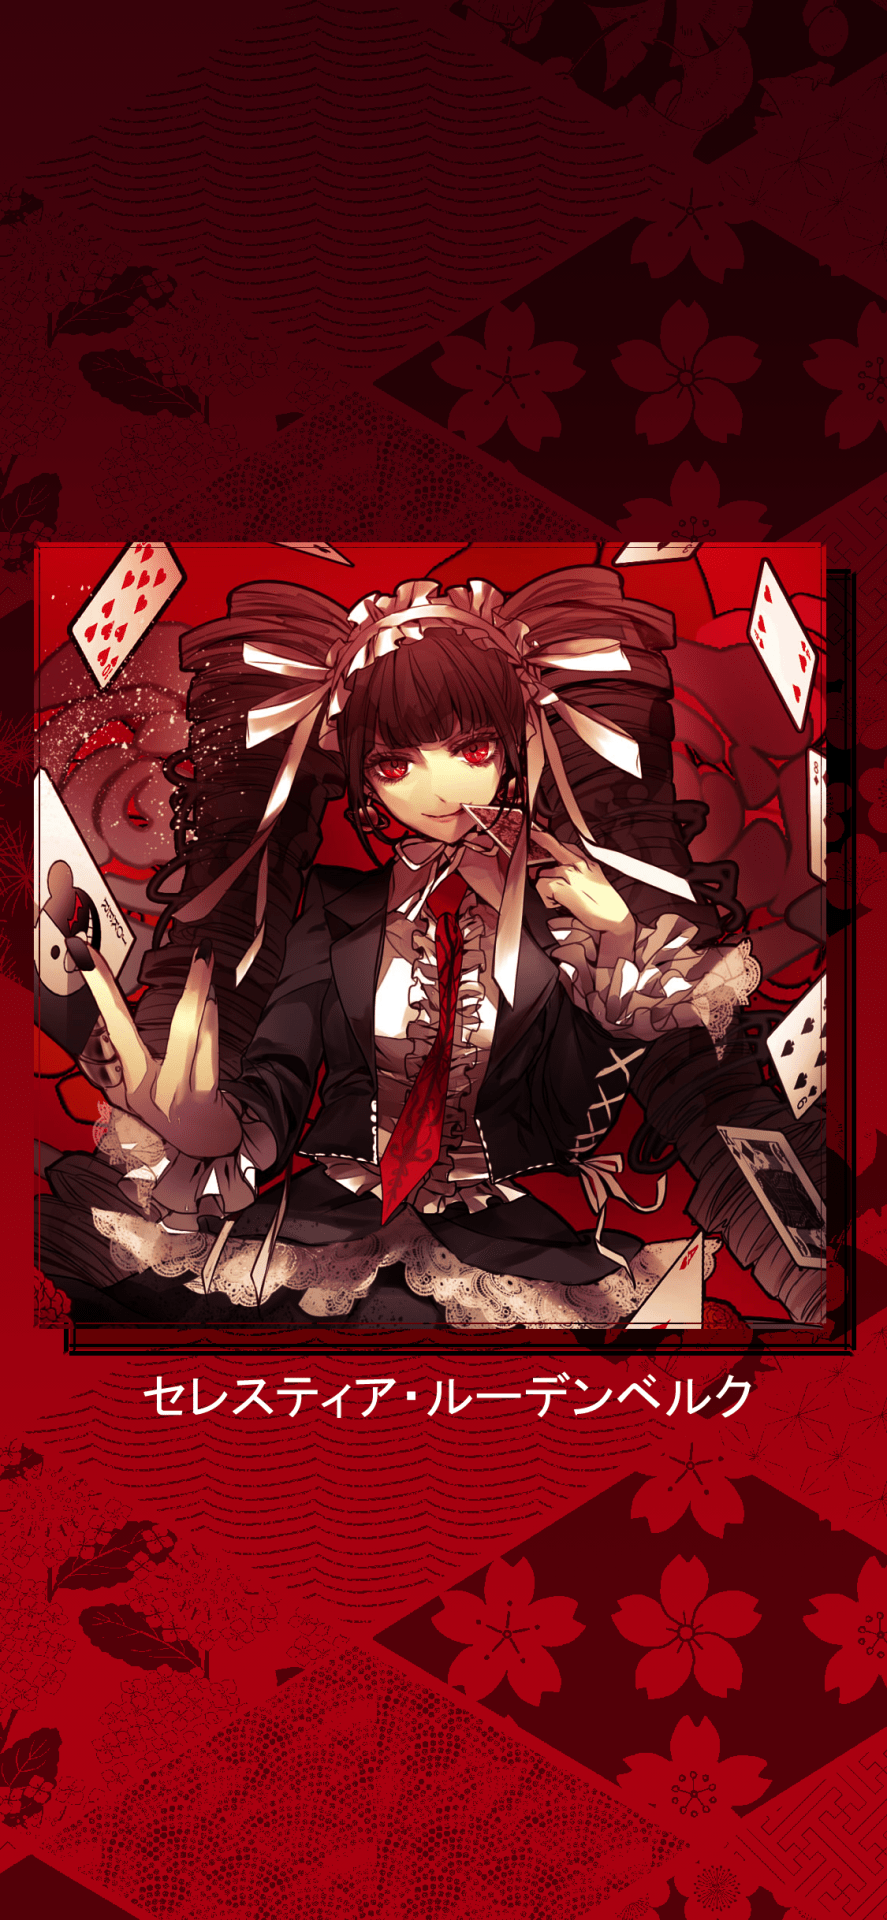 A picture of anime girl with cards - Danganronpa